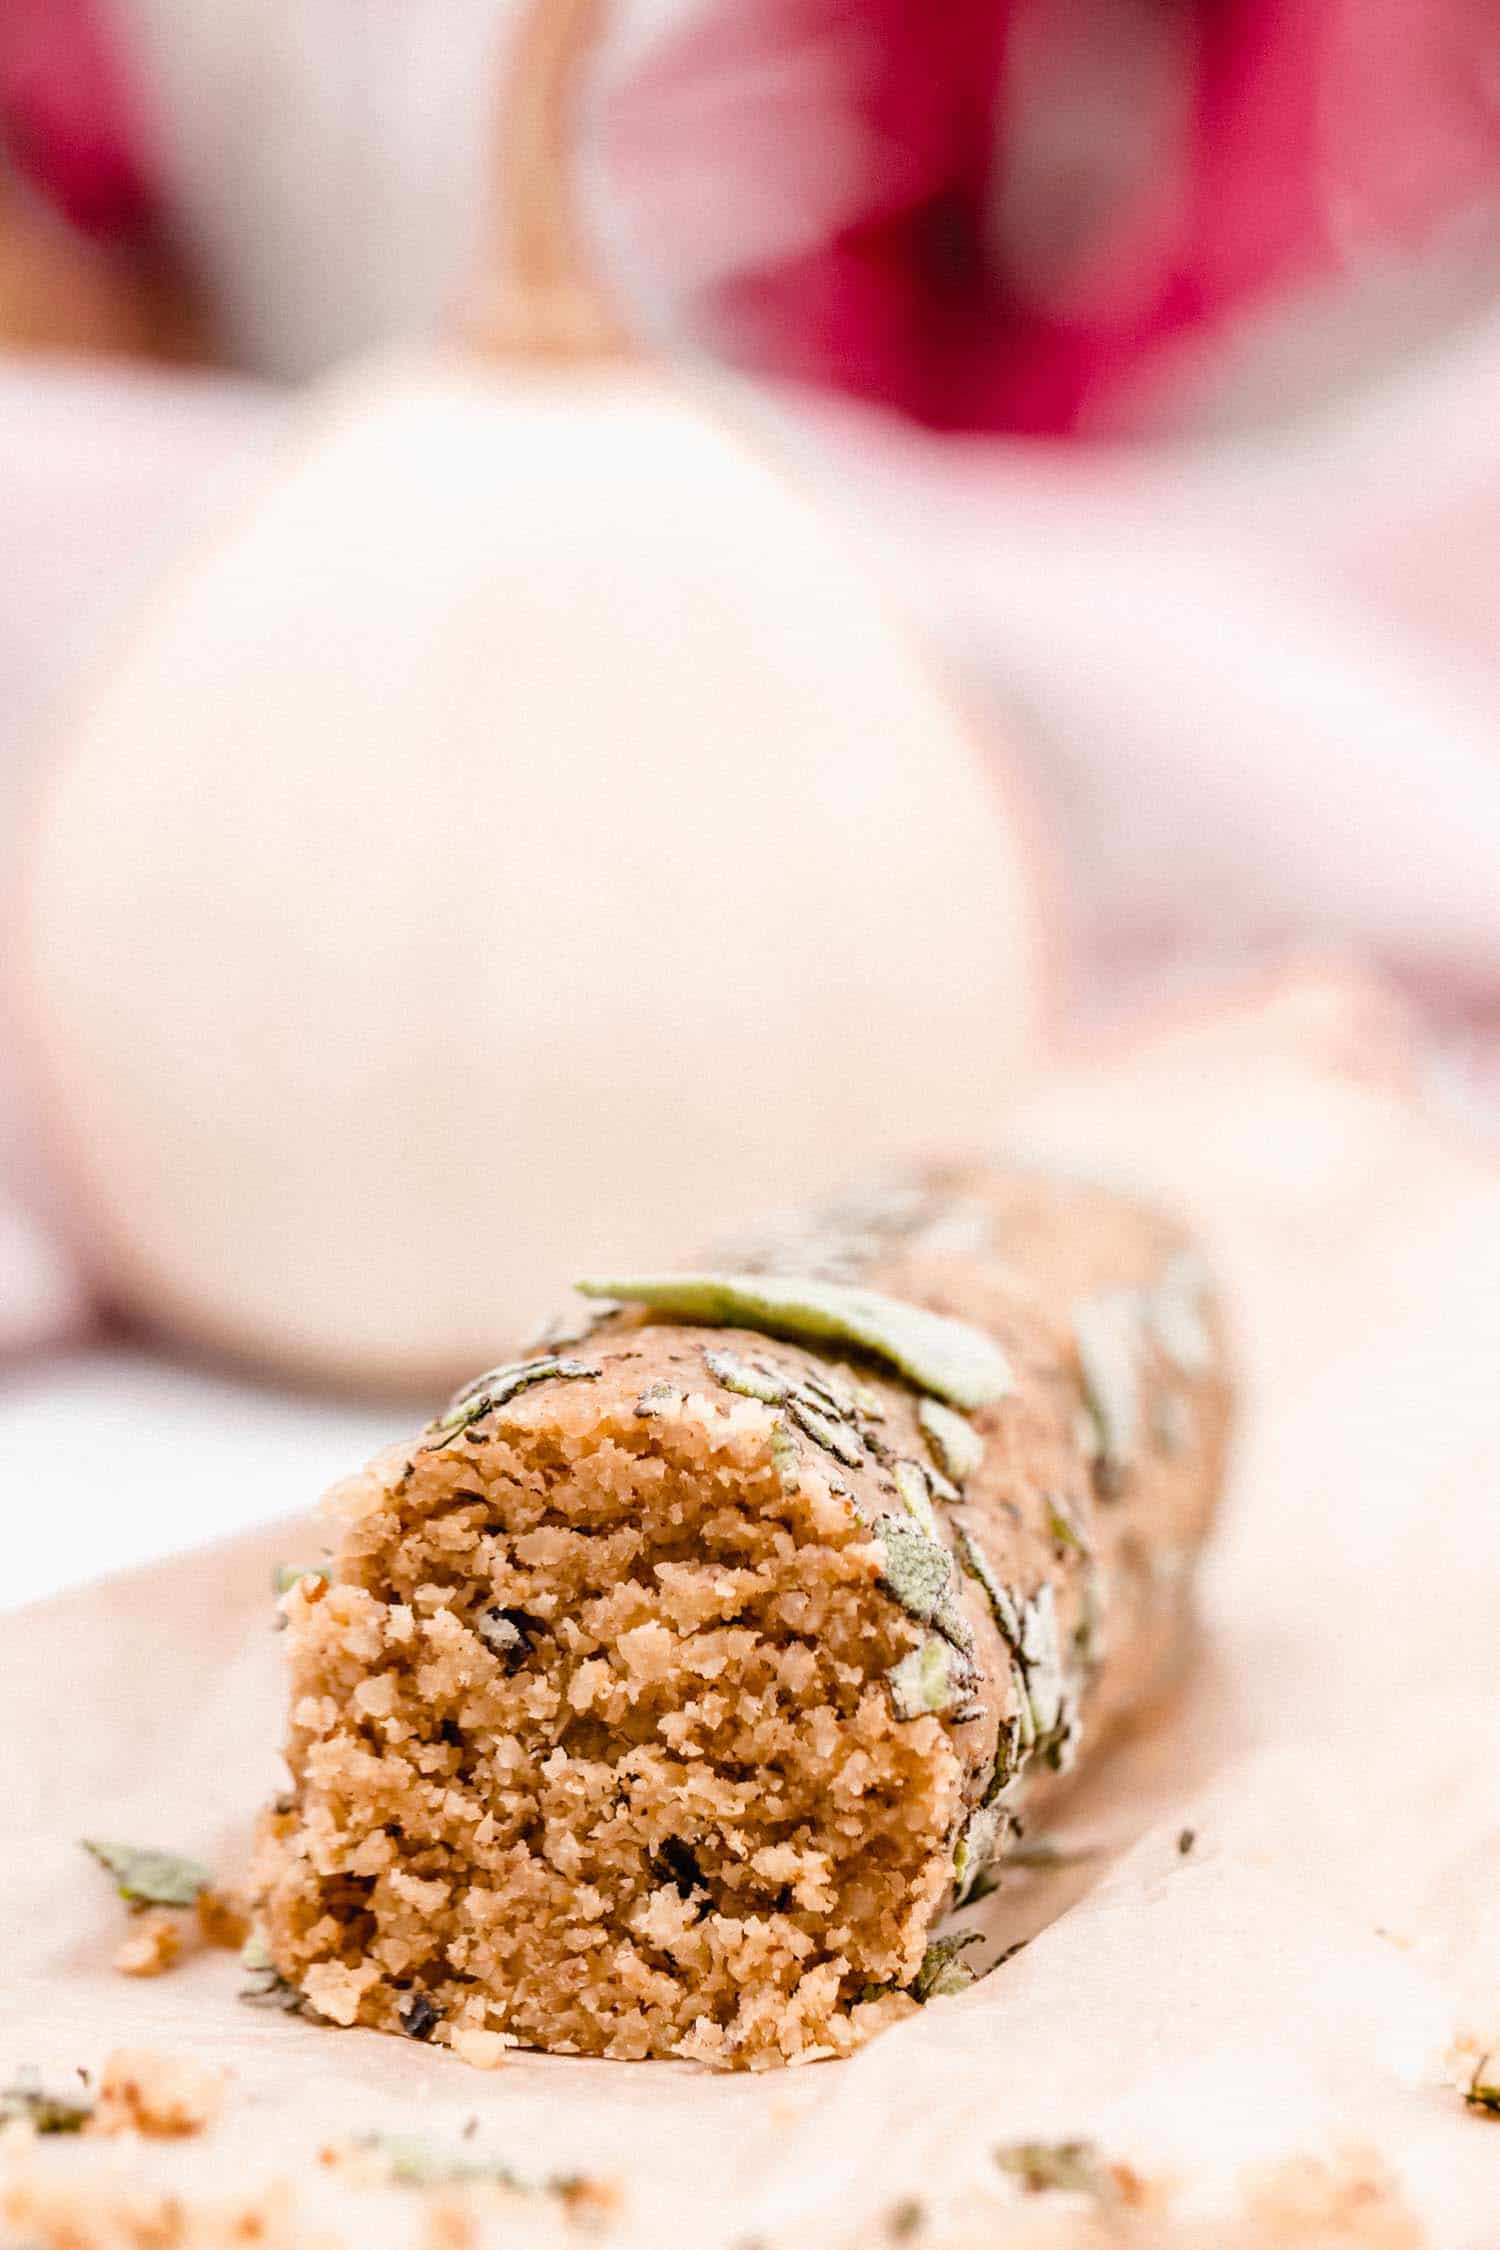 A vegan cheese log made of brazil nuts for a Thanksgiving appetizer.